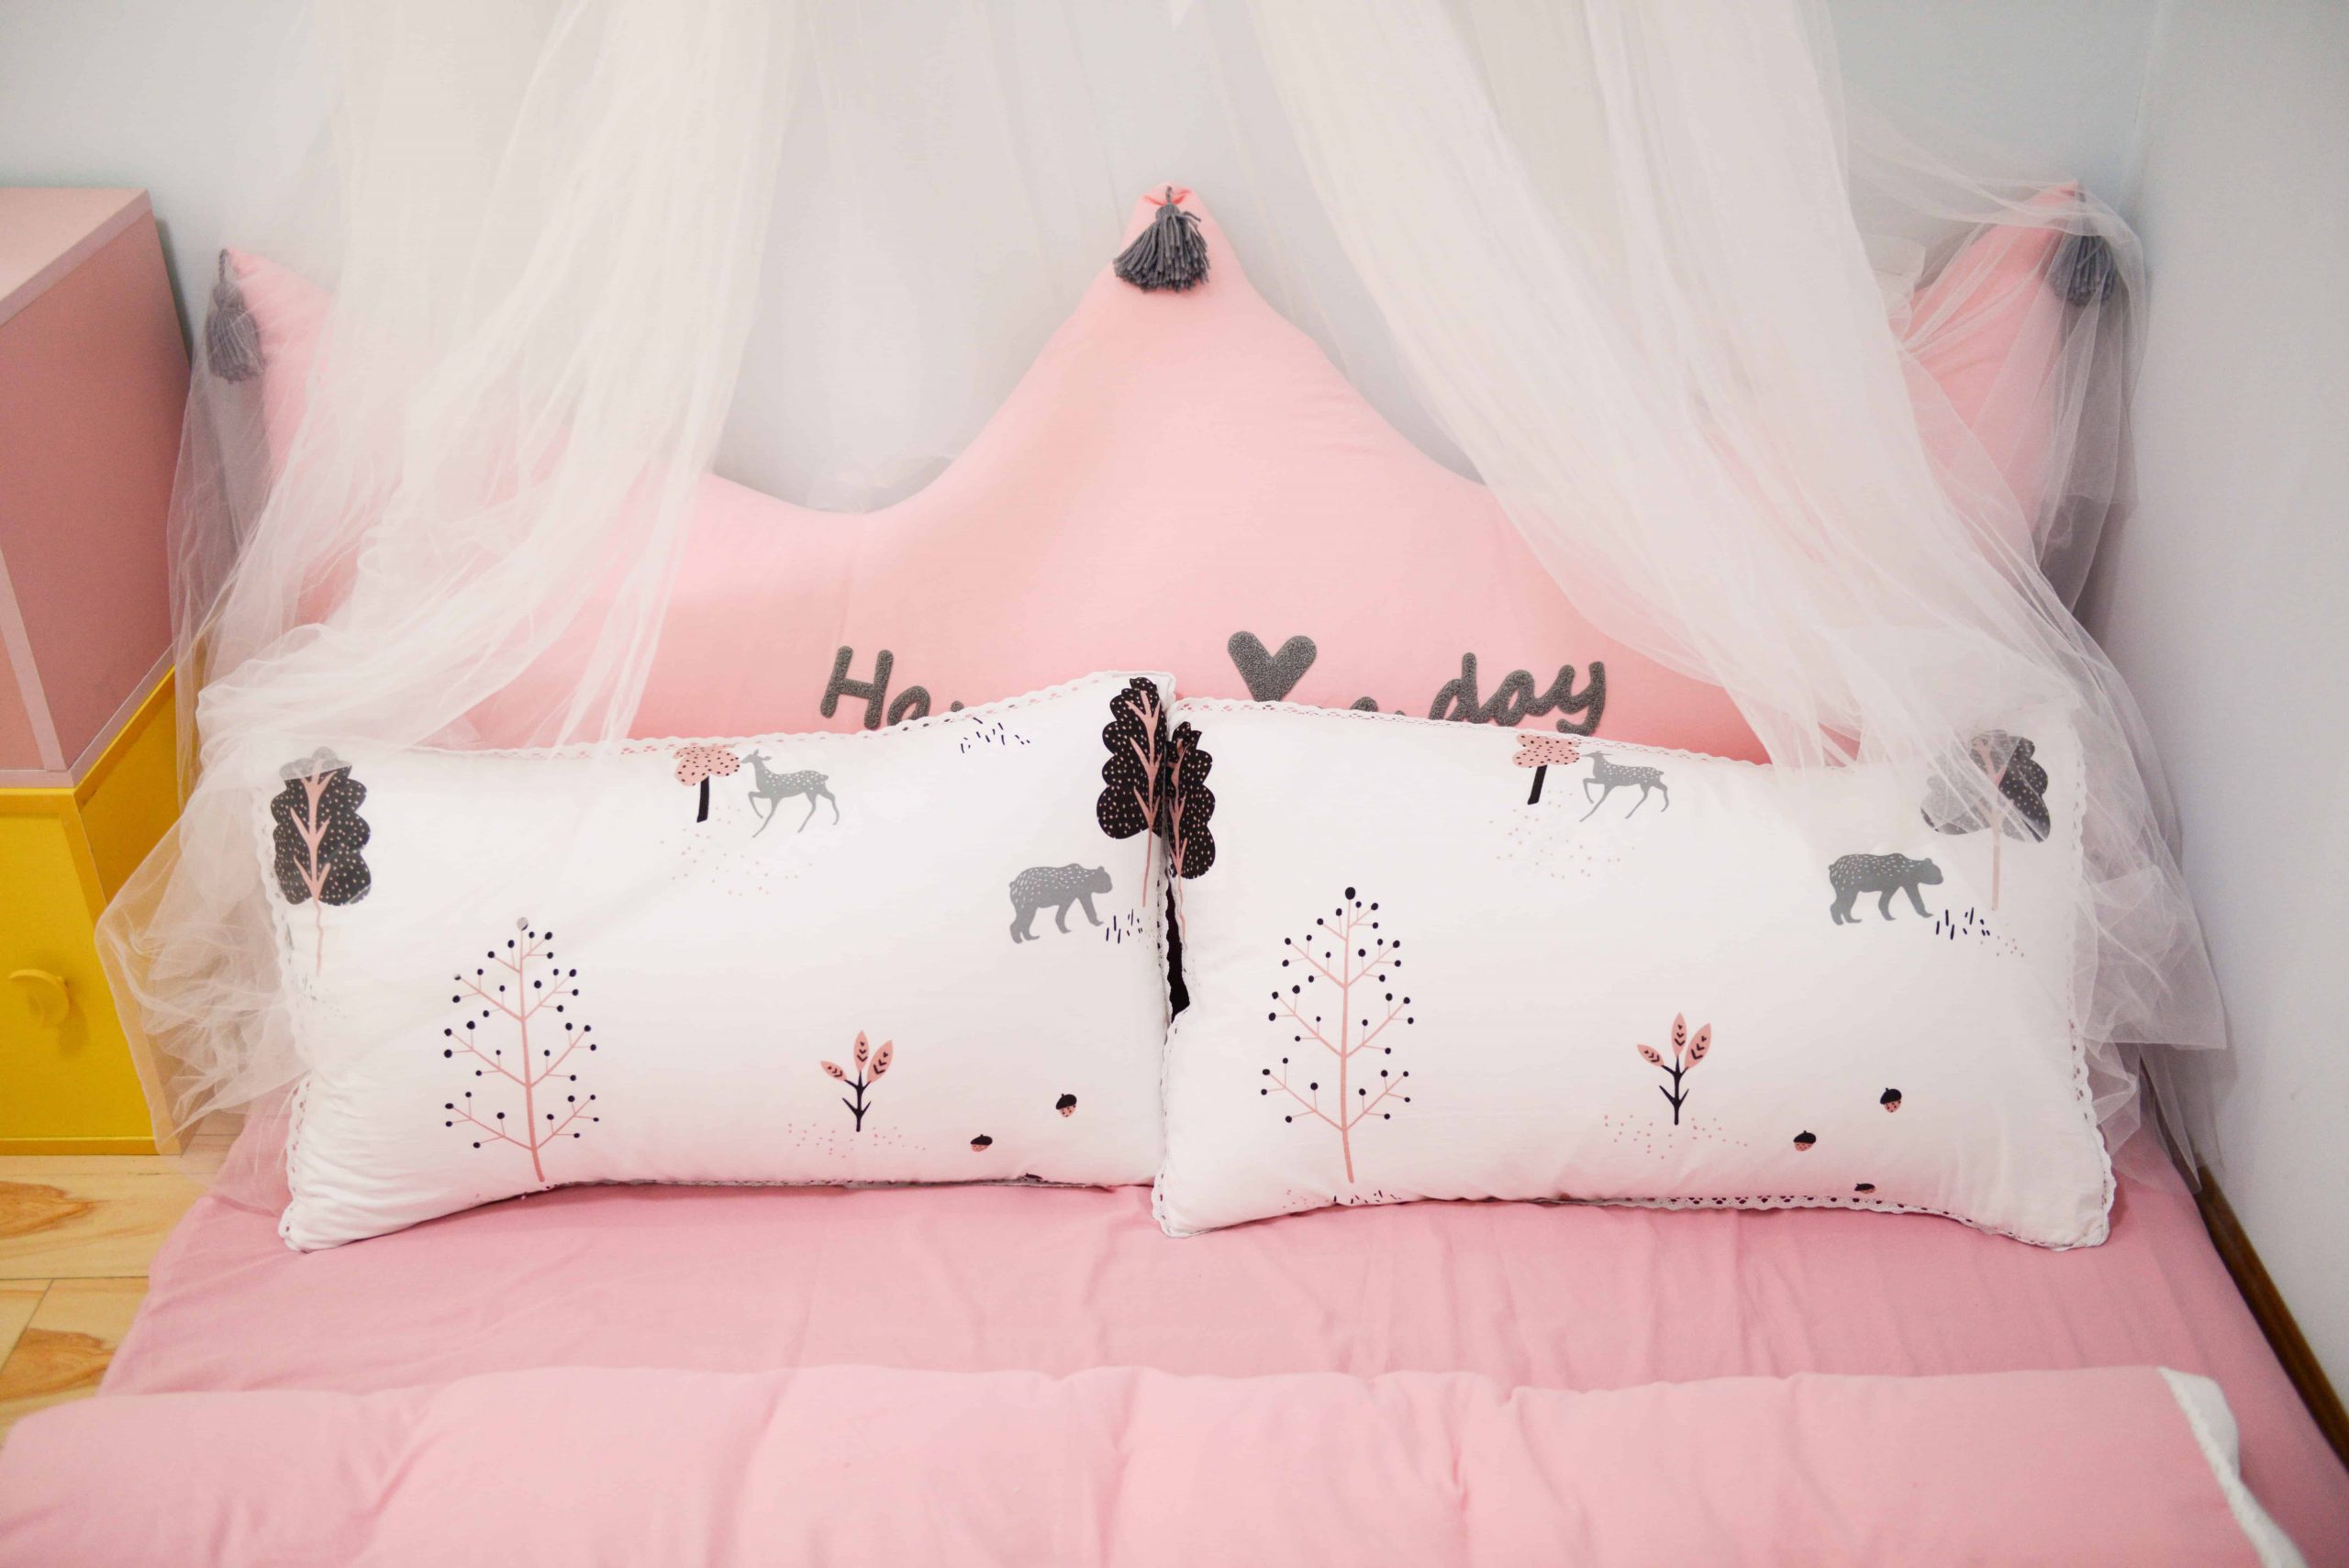 two pillows on a pink bed